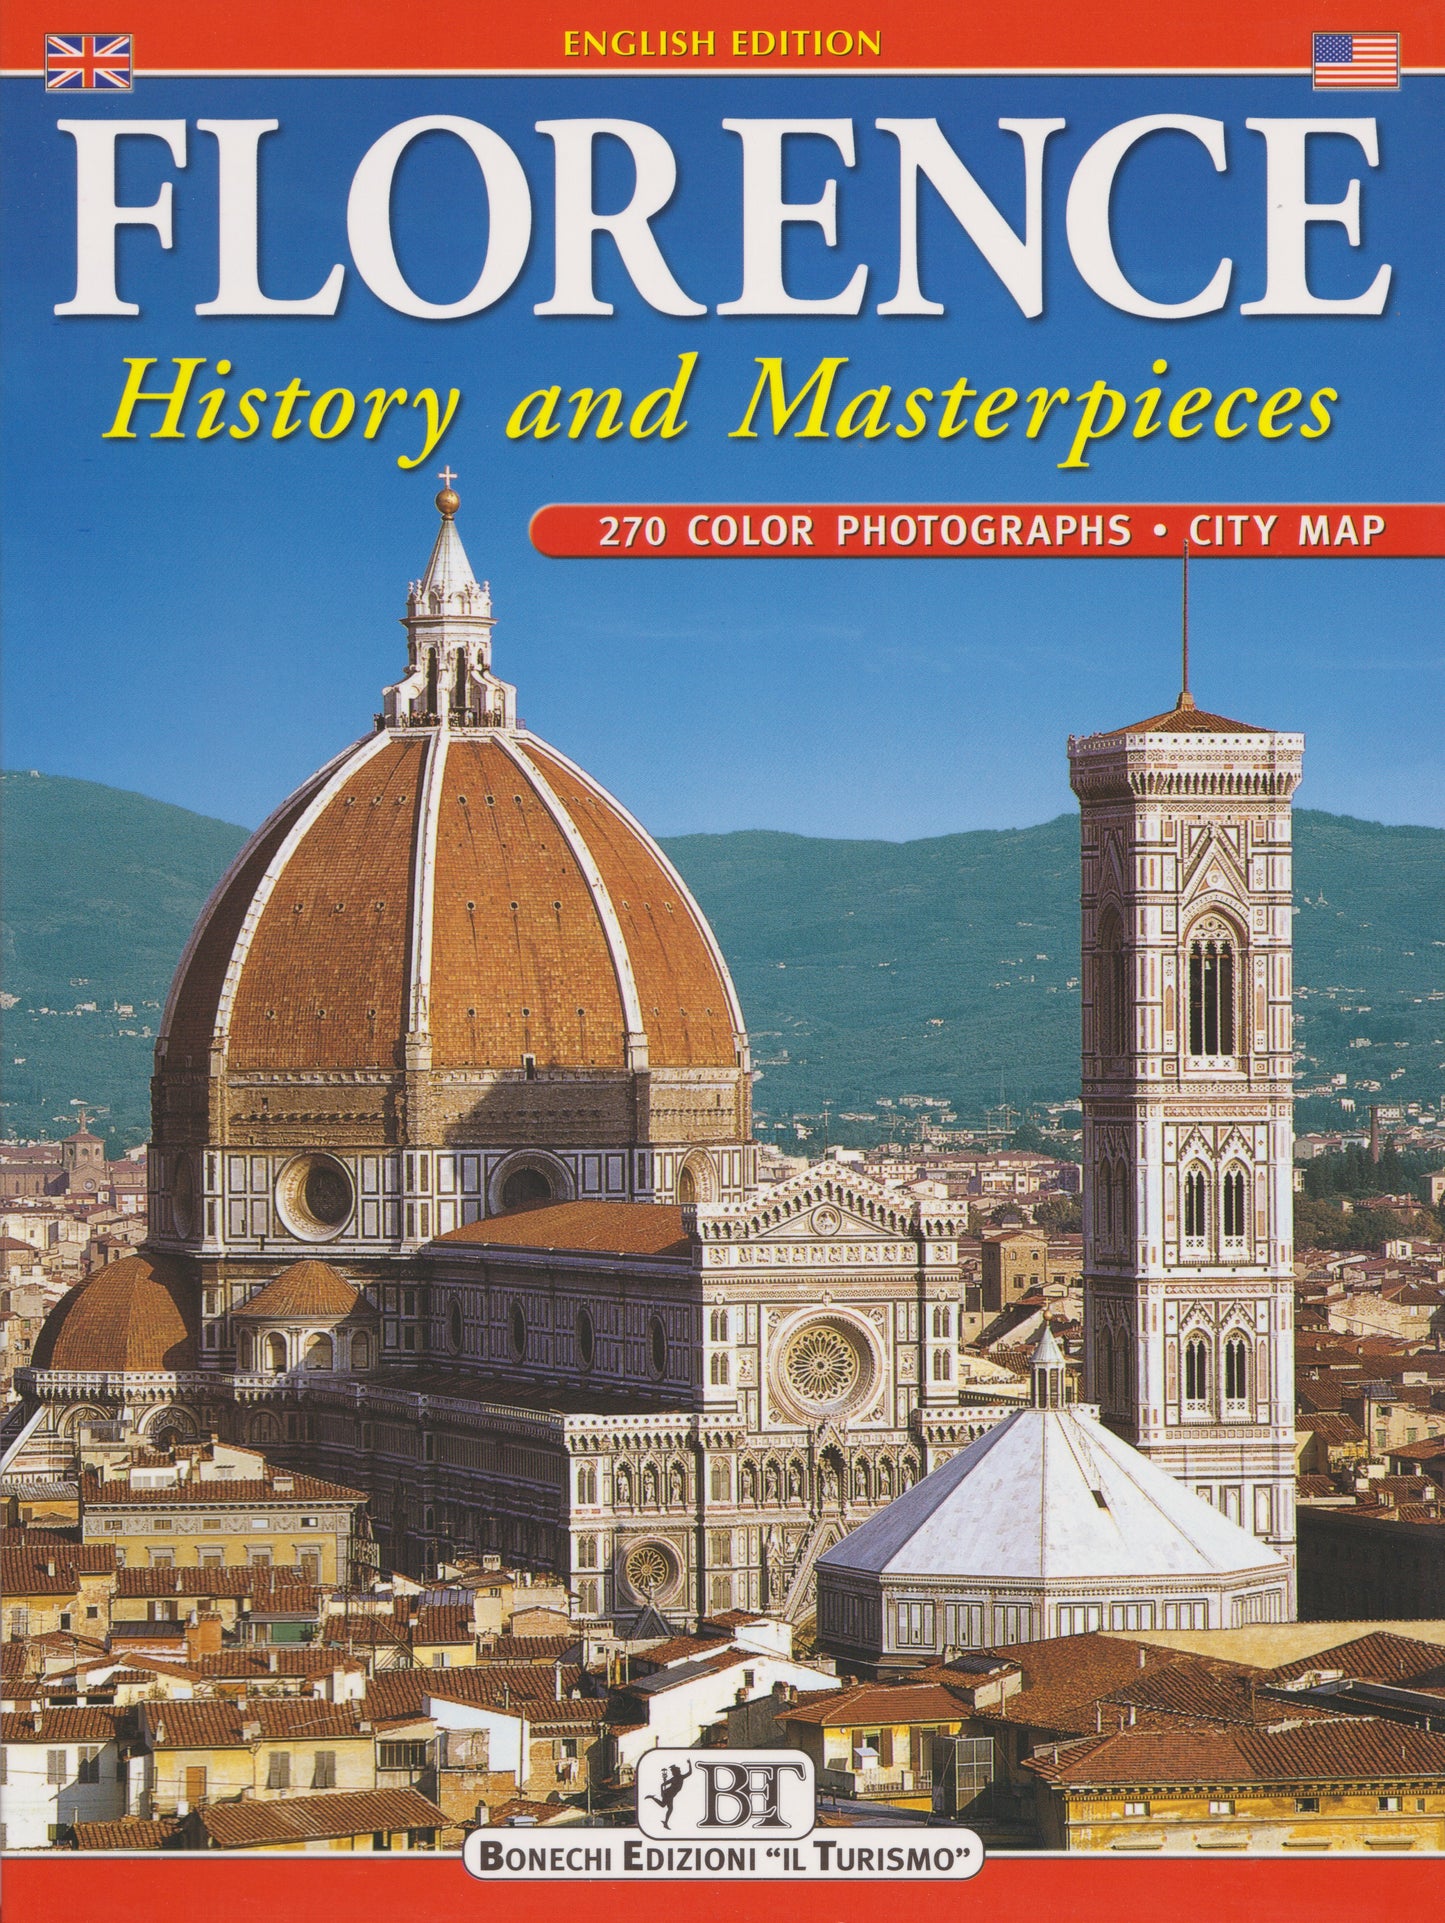 Florence, history and masterpieces - English Edition